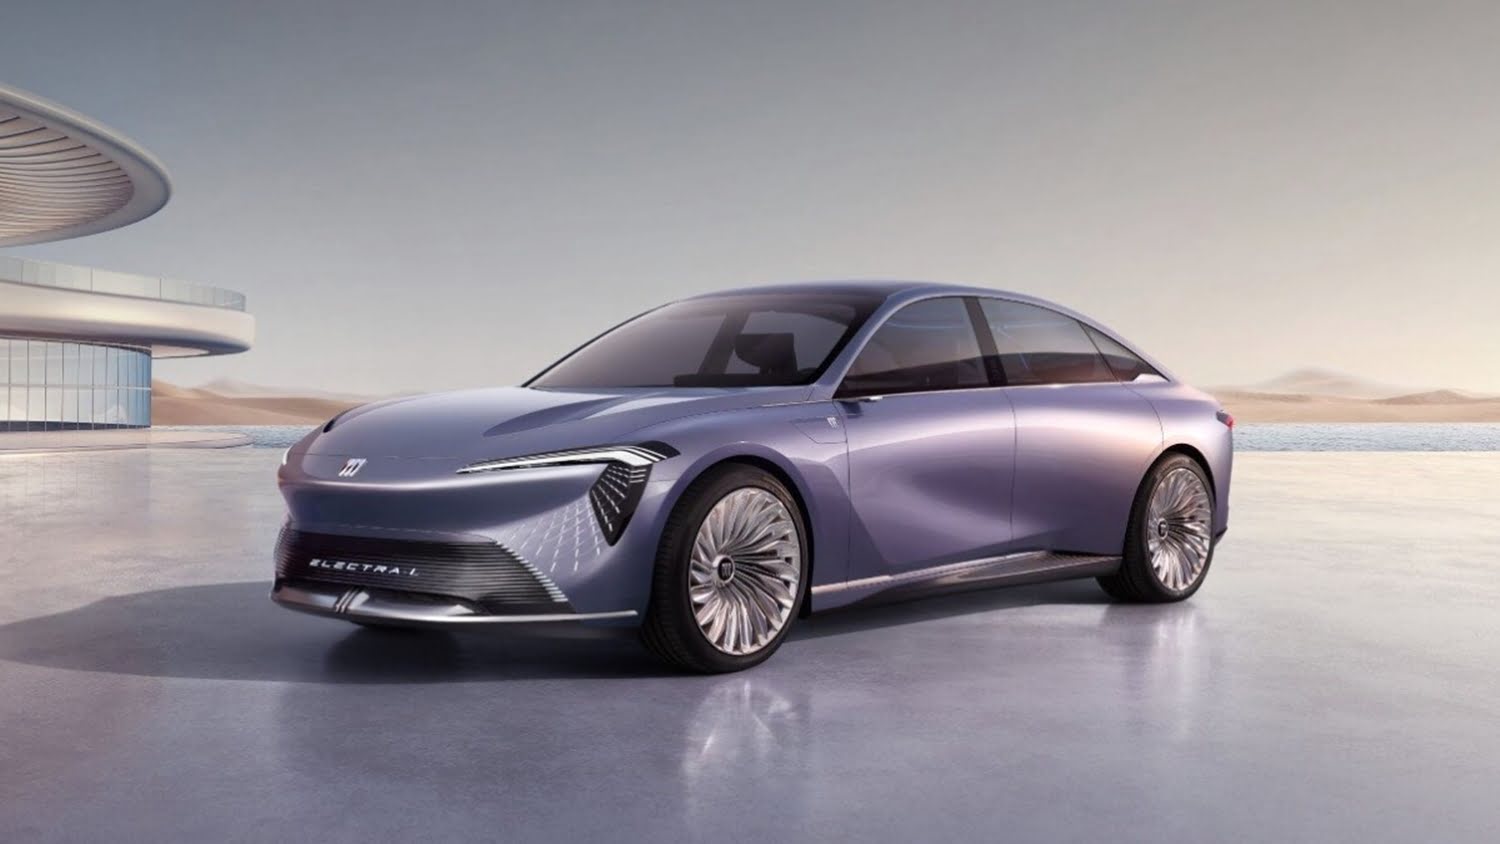 Buick Transforms Concept Cars into Reality with Electra-L Series